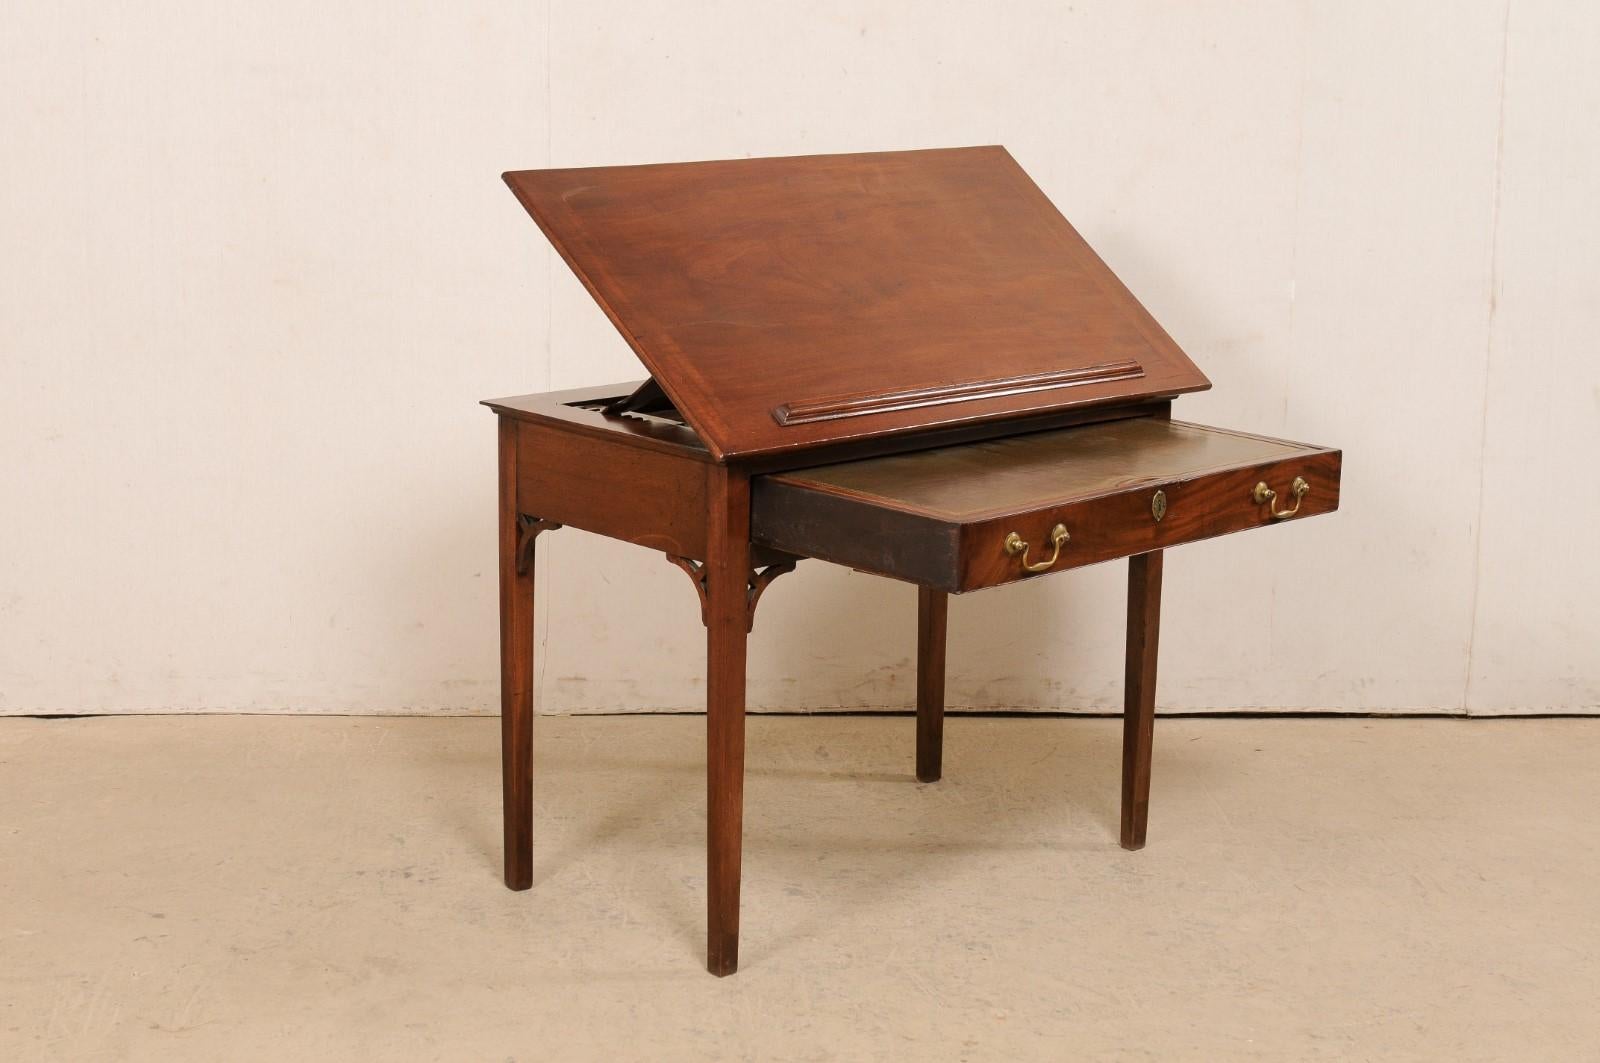 A fabulous English architect's desk with green leather writing pad and dual tilt top from the 19th century. This antique Late Georgian table from England, created of mahogany, is big on design, craftsmanship and functionality; featuring a top with